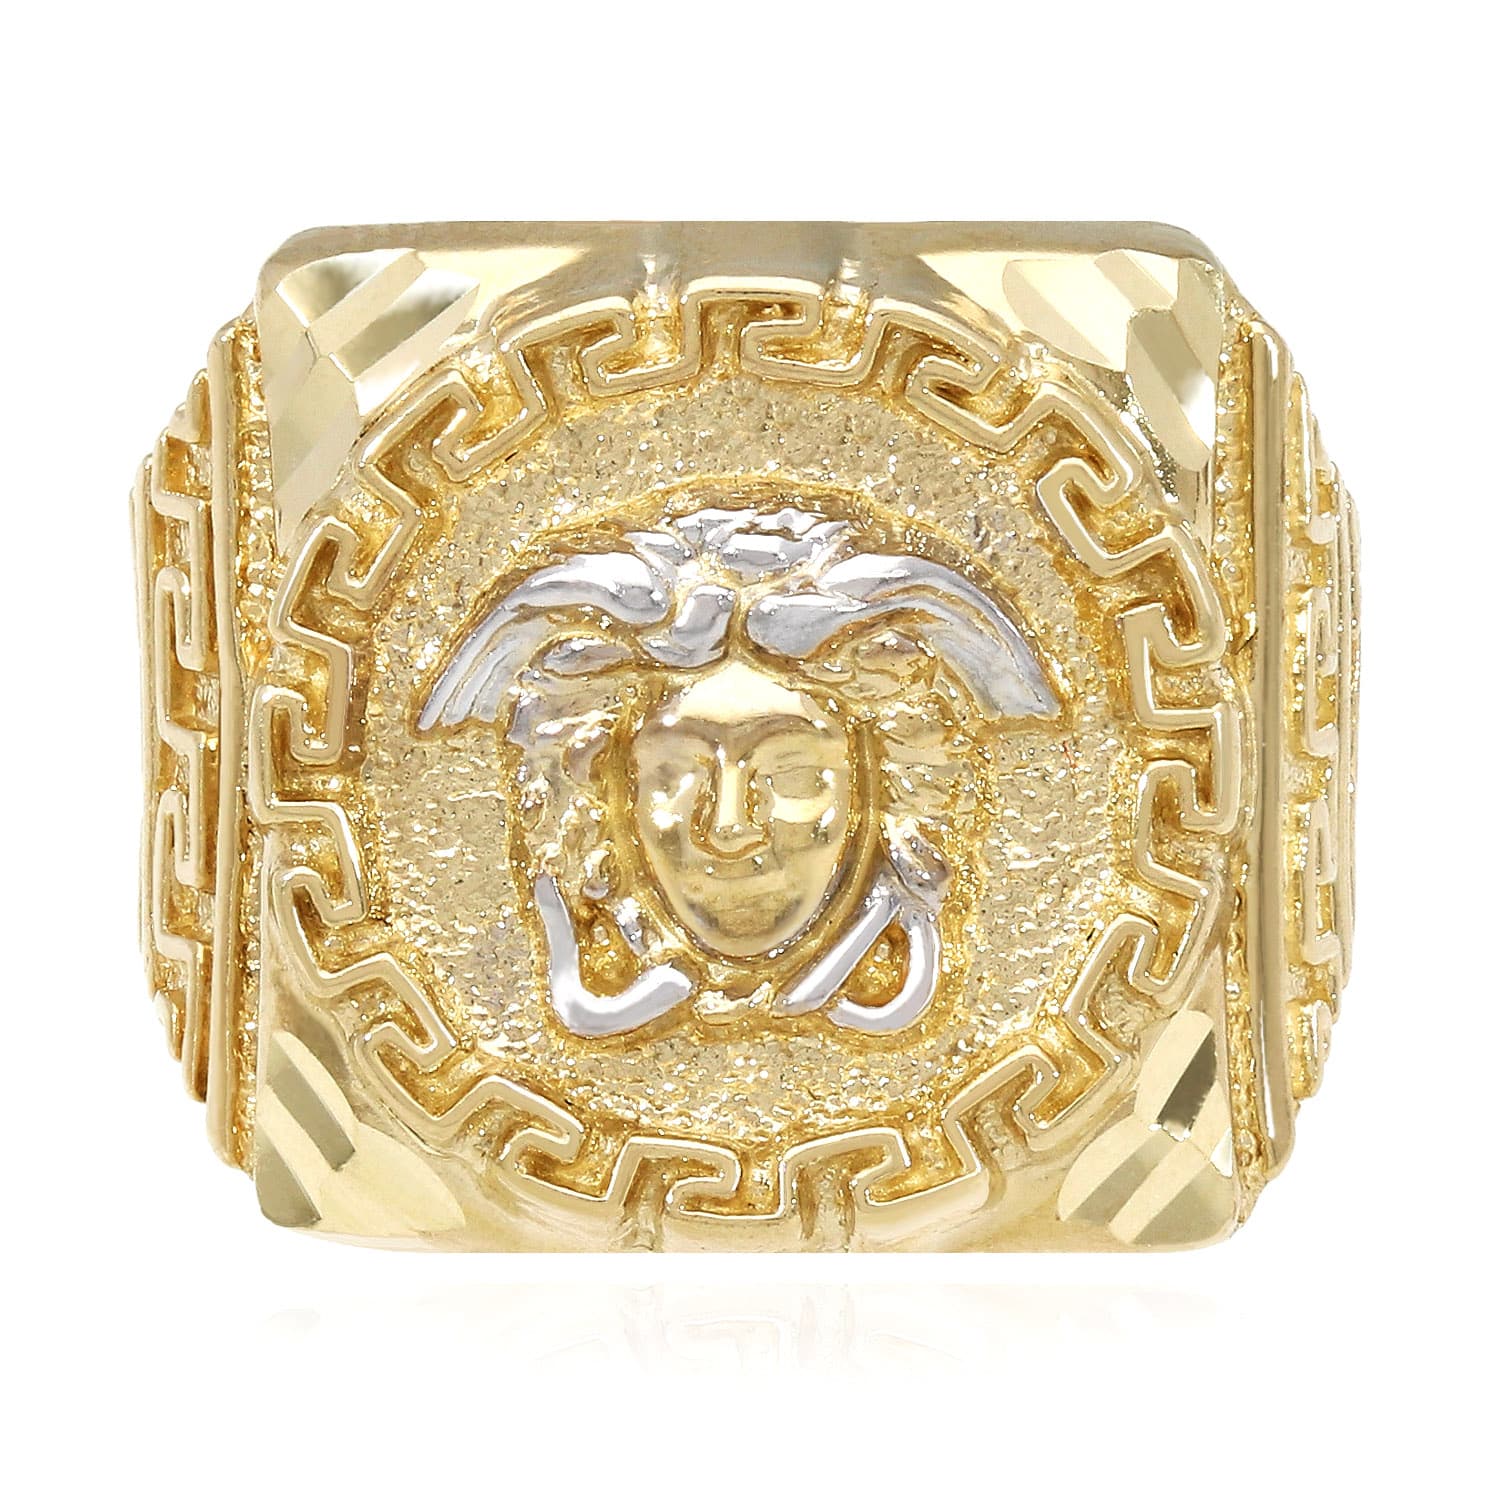 K Yellow Gold With White Gold Accents Diamond Cut Medusa Head Signet Ring Wjd Exclusives